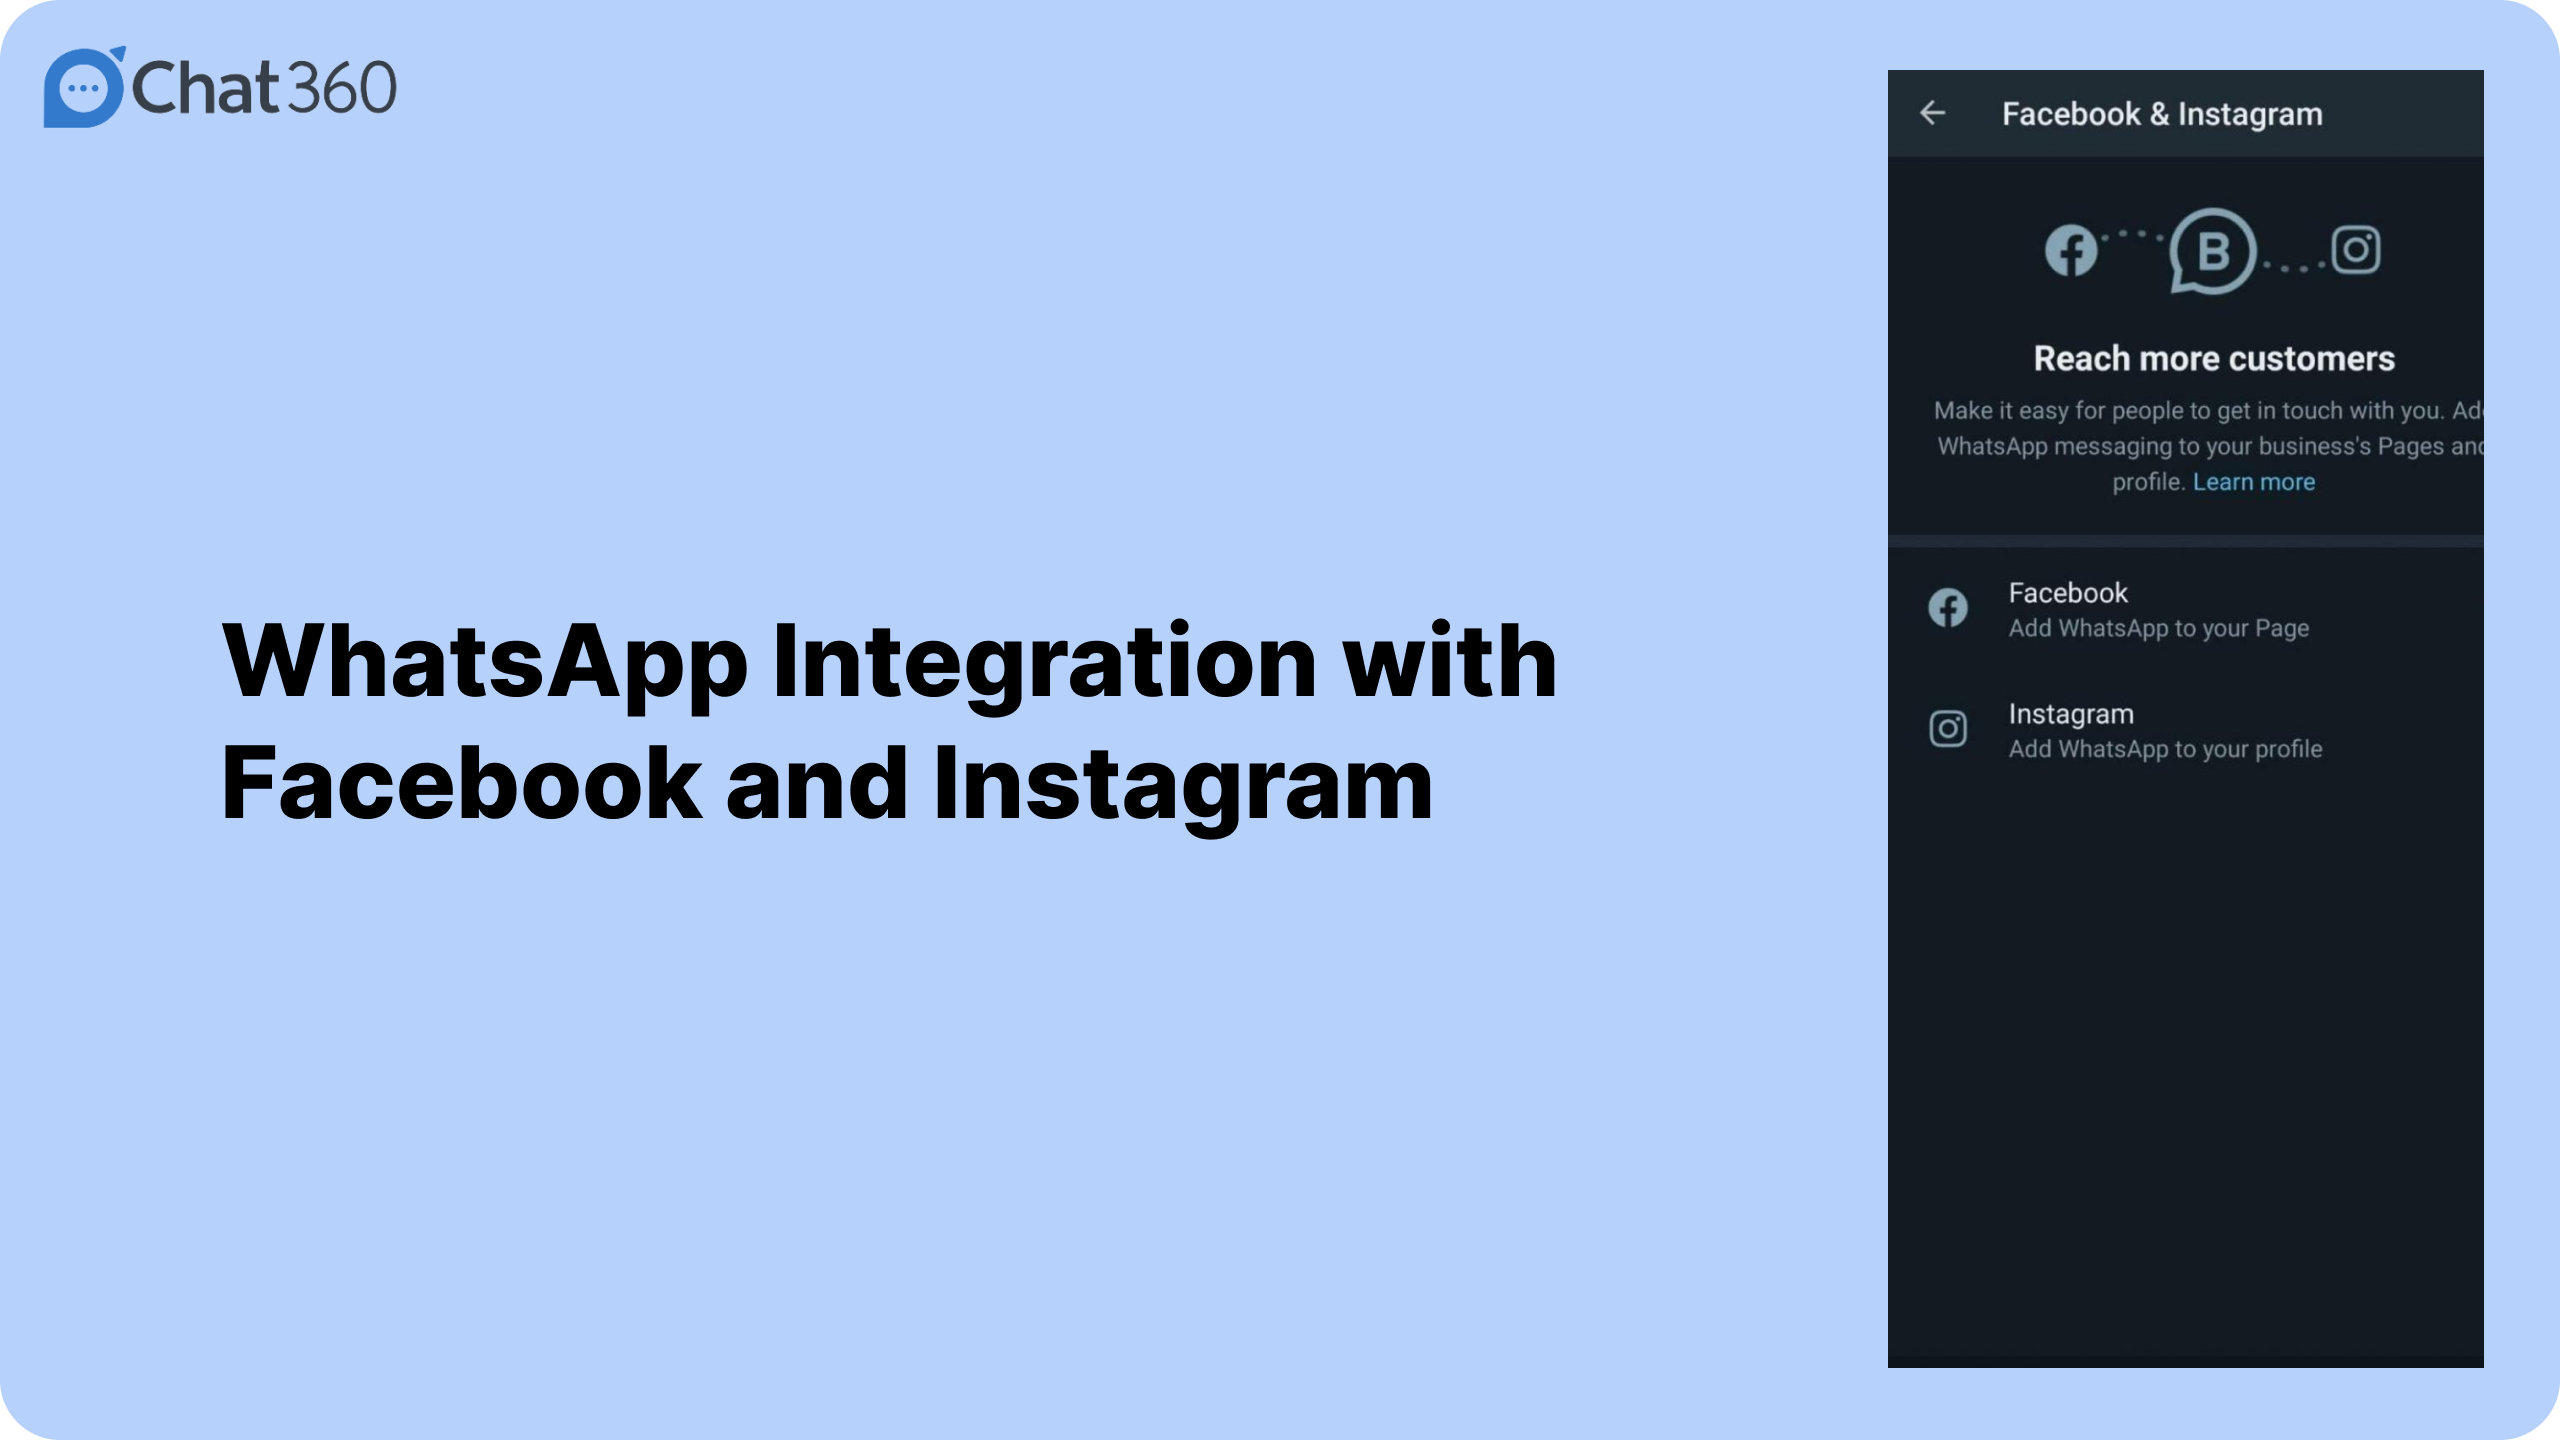 WhatsApp integration with Facebook and Instagram